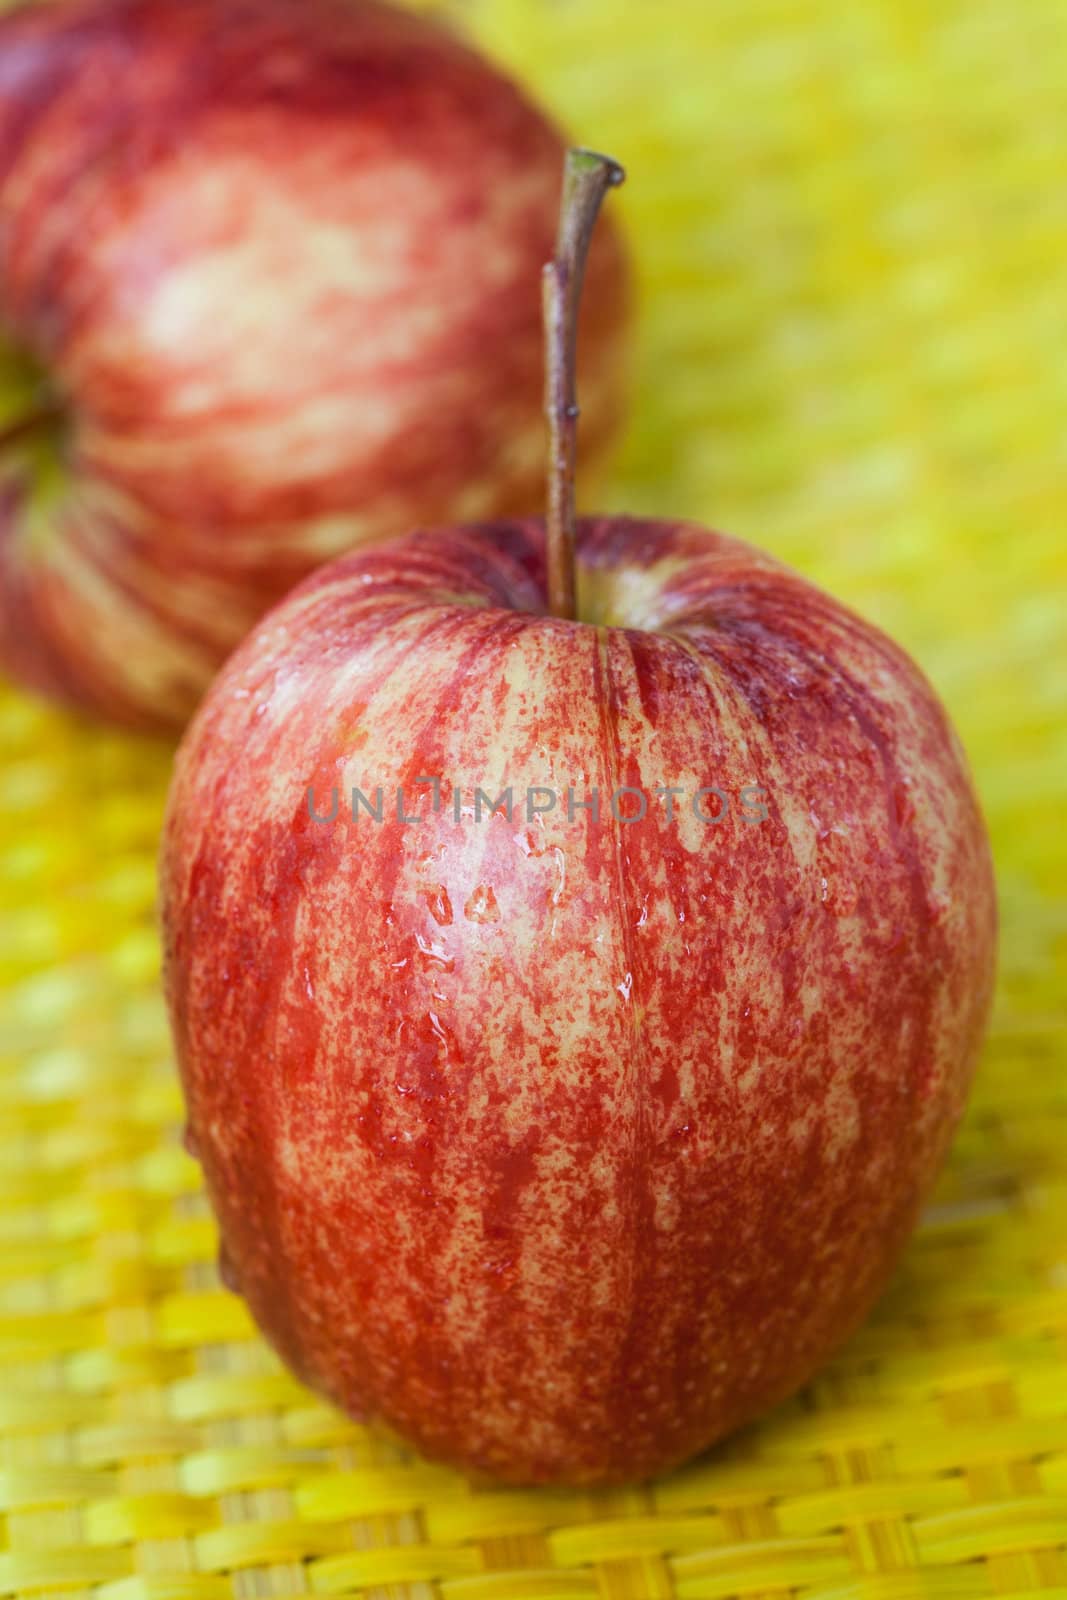 Red apple placed on a bamboo basket.